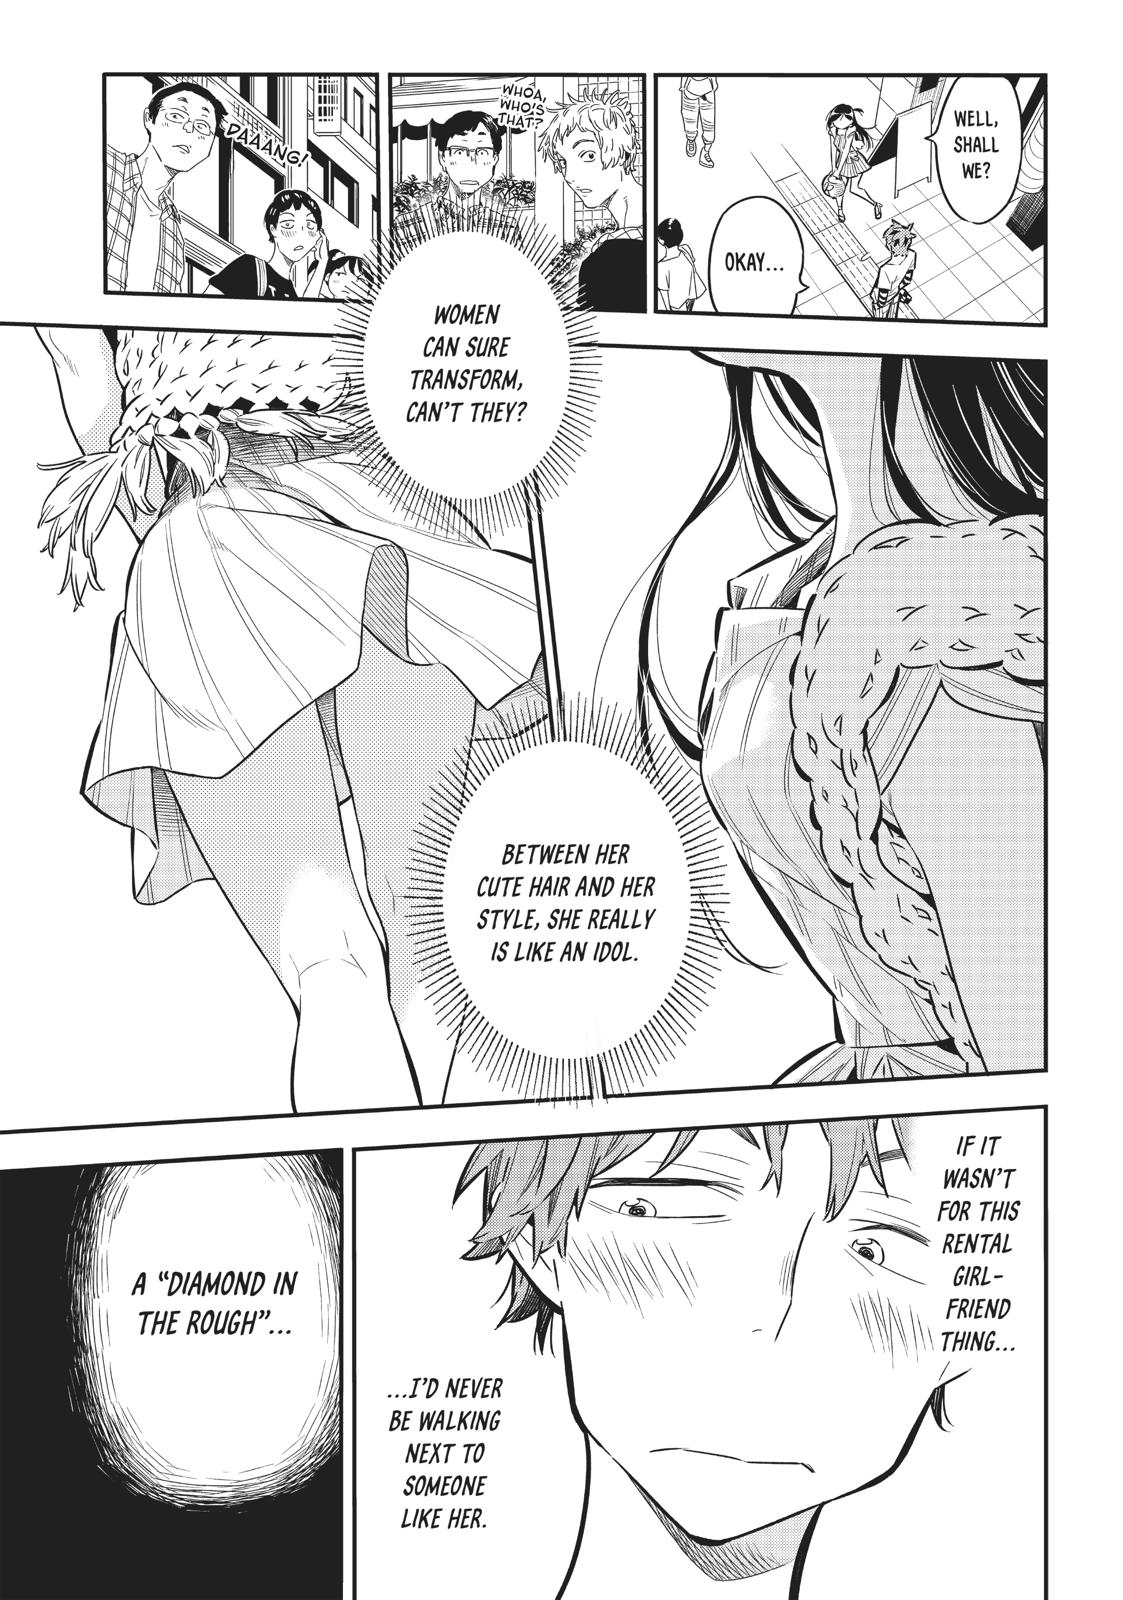 Rent A GirlFriend, Chapter  2 image 021